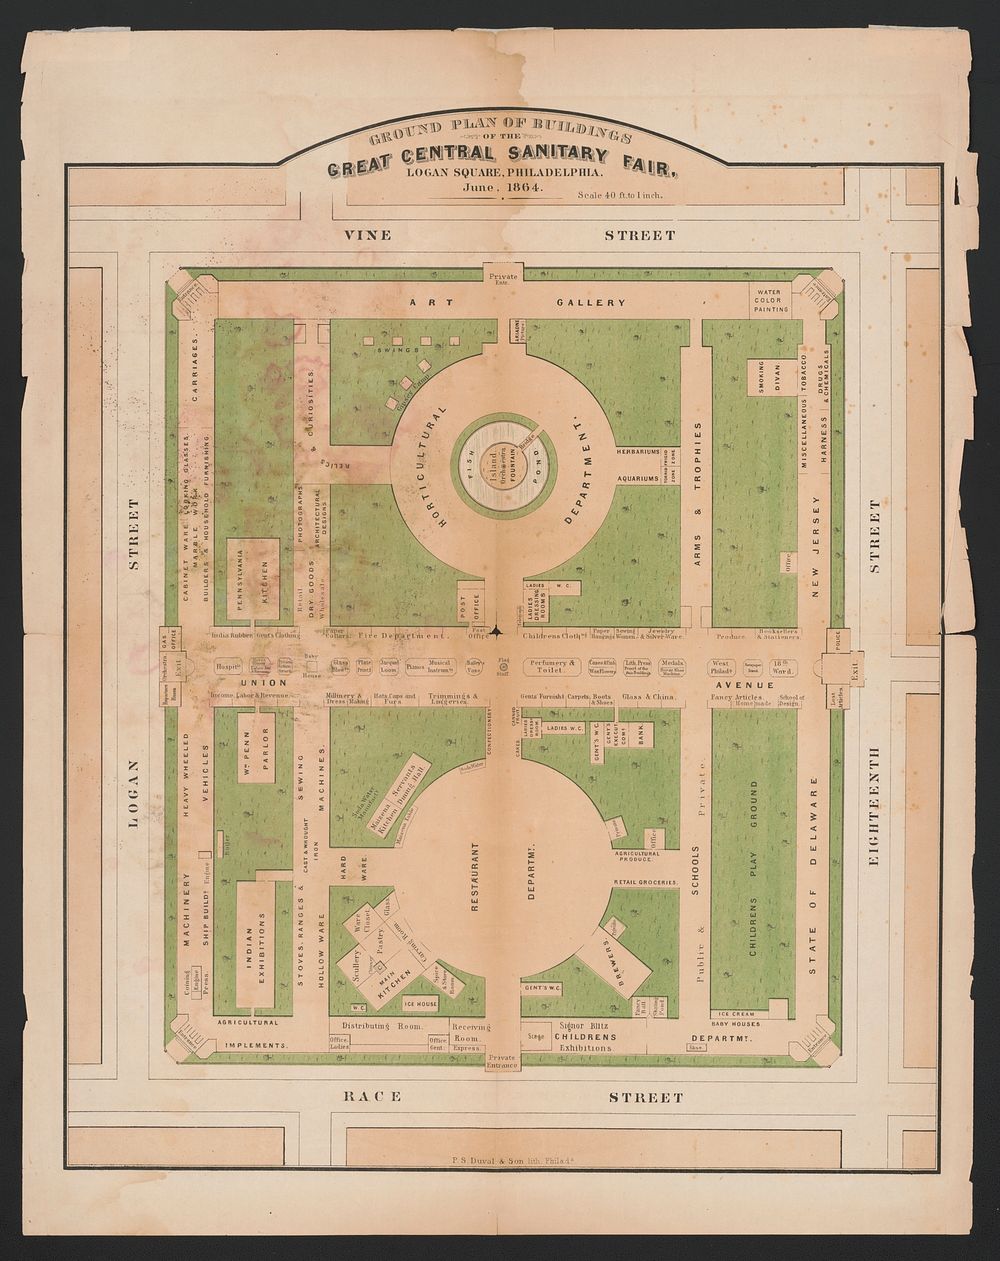 Ground plan of buildings of the great central sanitary fair, Logan Square, Philadelphia, June 1864, P.S. Duval & Son…